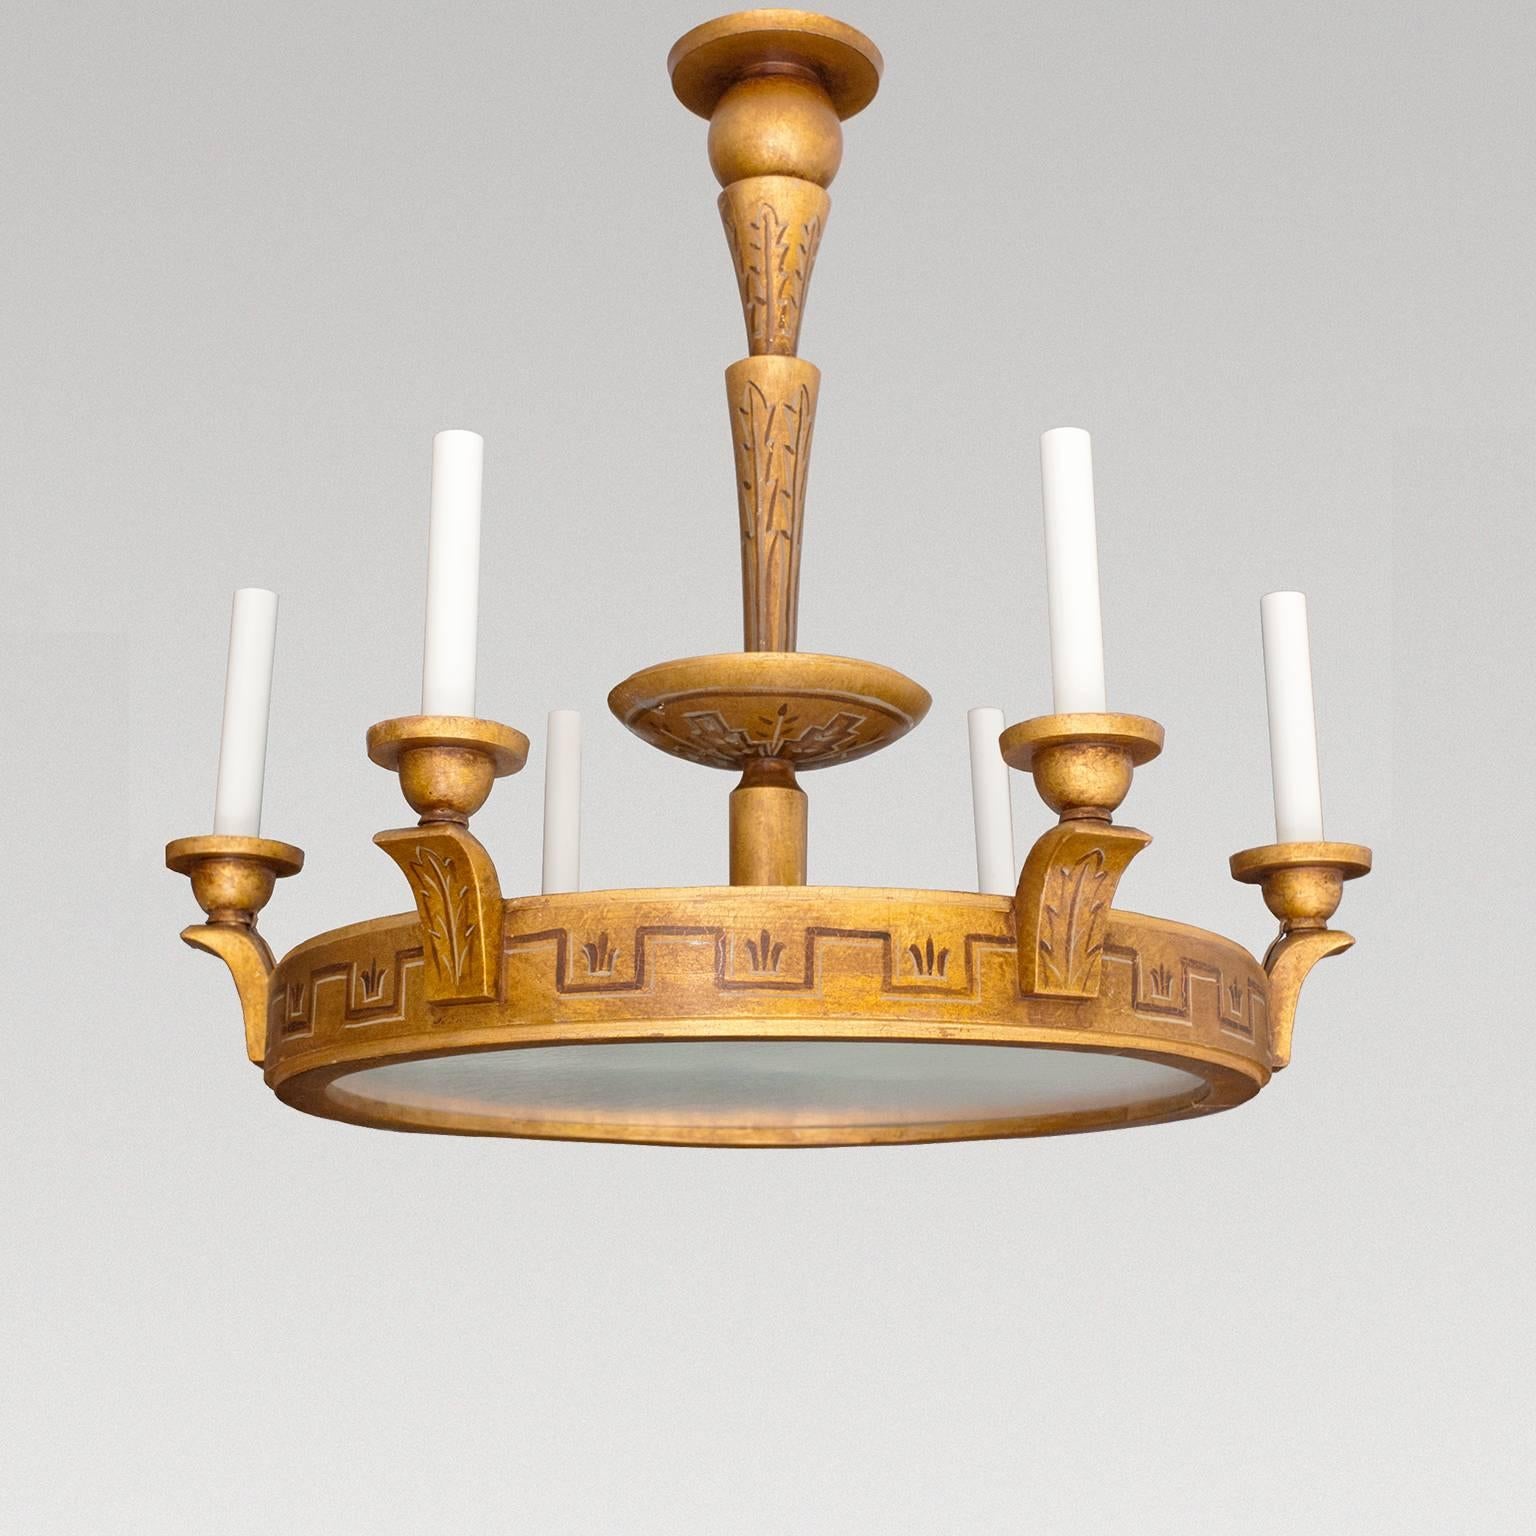 Unique Swedish Art Deco ring form chandelier with six arms. There are three additional sockets within the ring which illuminate a sandblasted glass plate diffuser. The chandelier features a hand-painted Meander motif in trompe l'oeil, The stem, arms